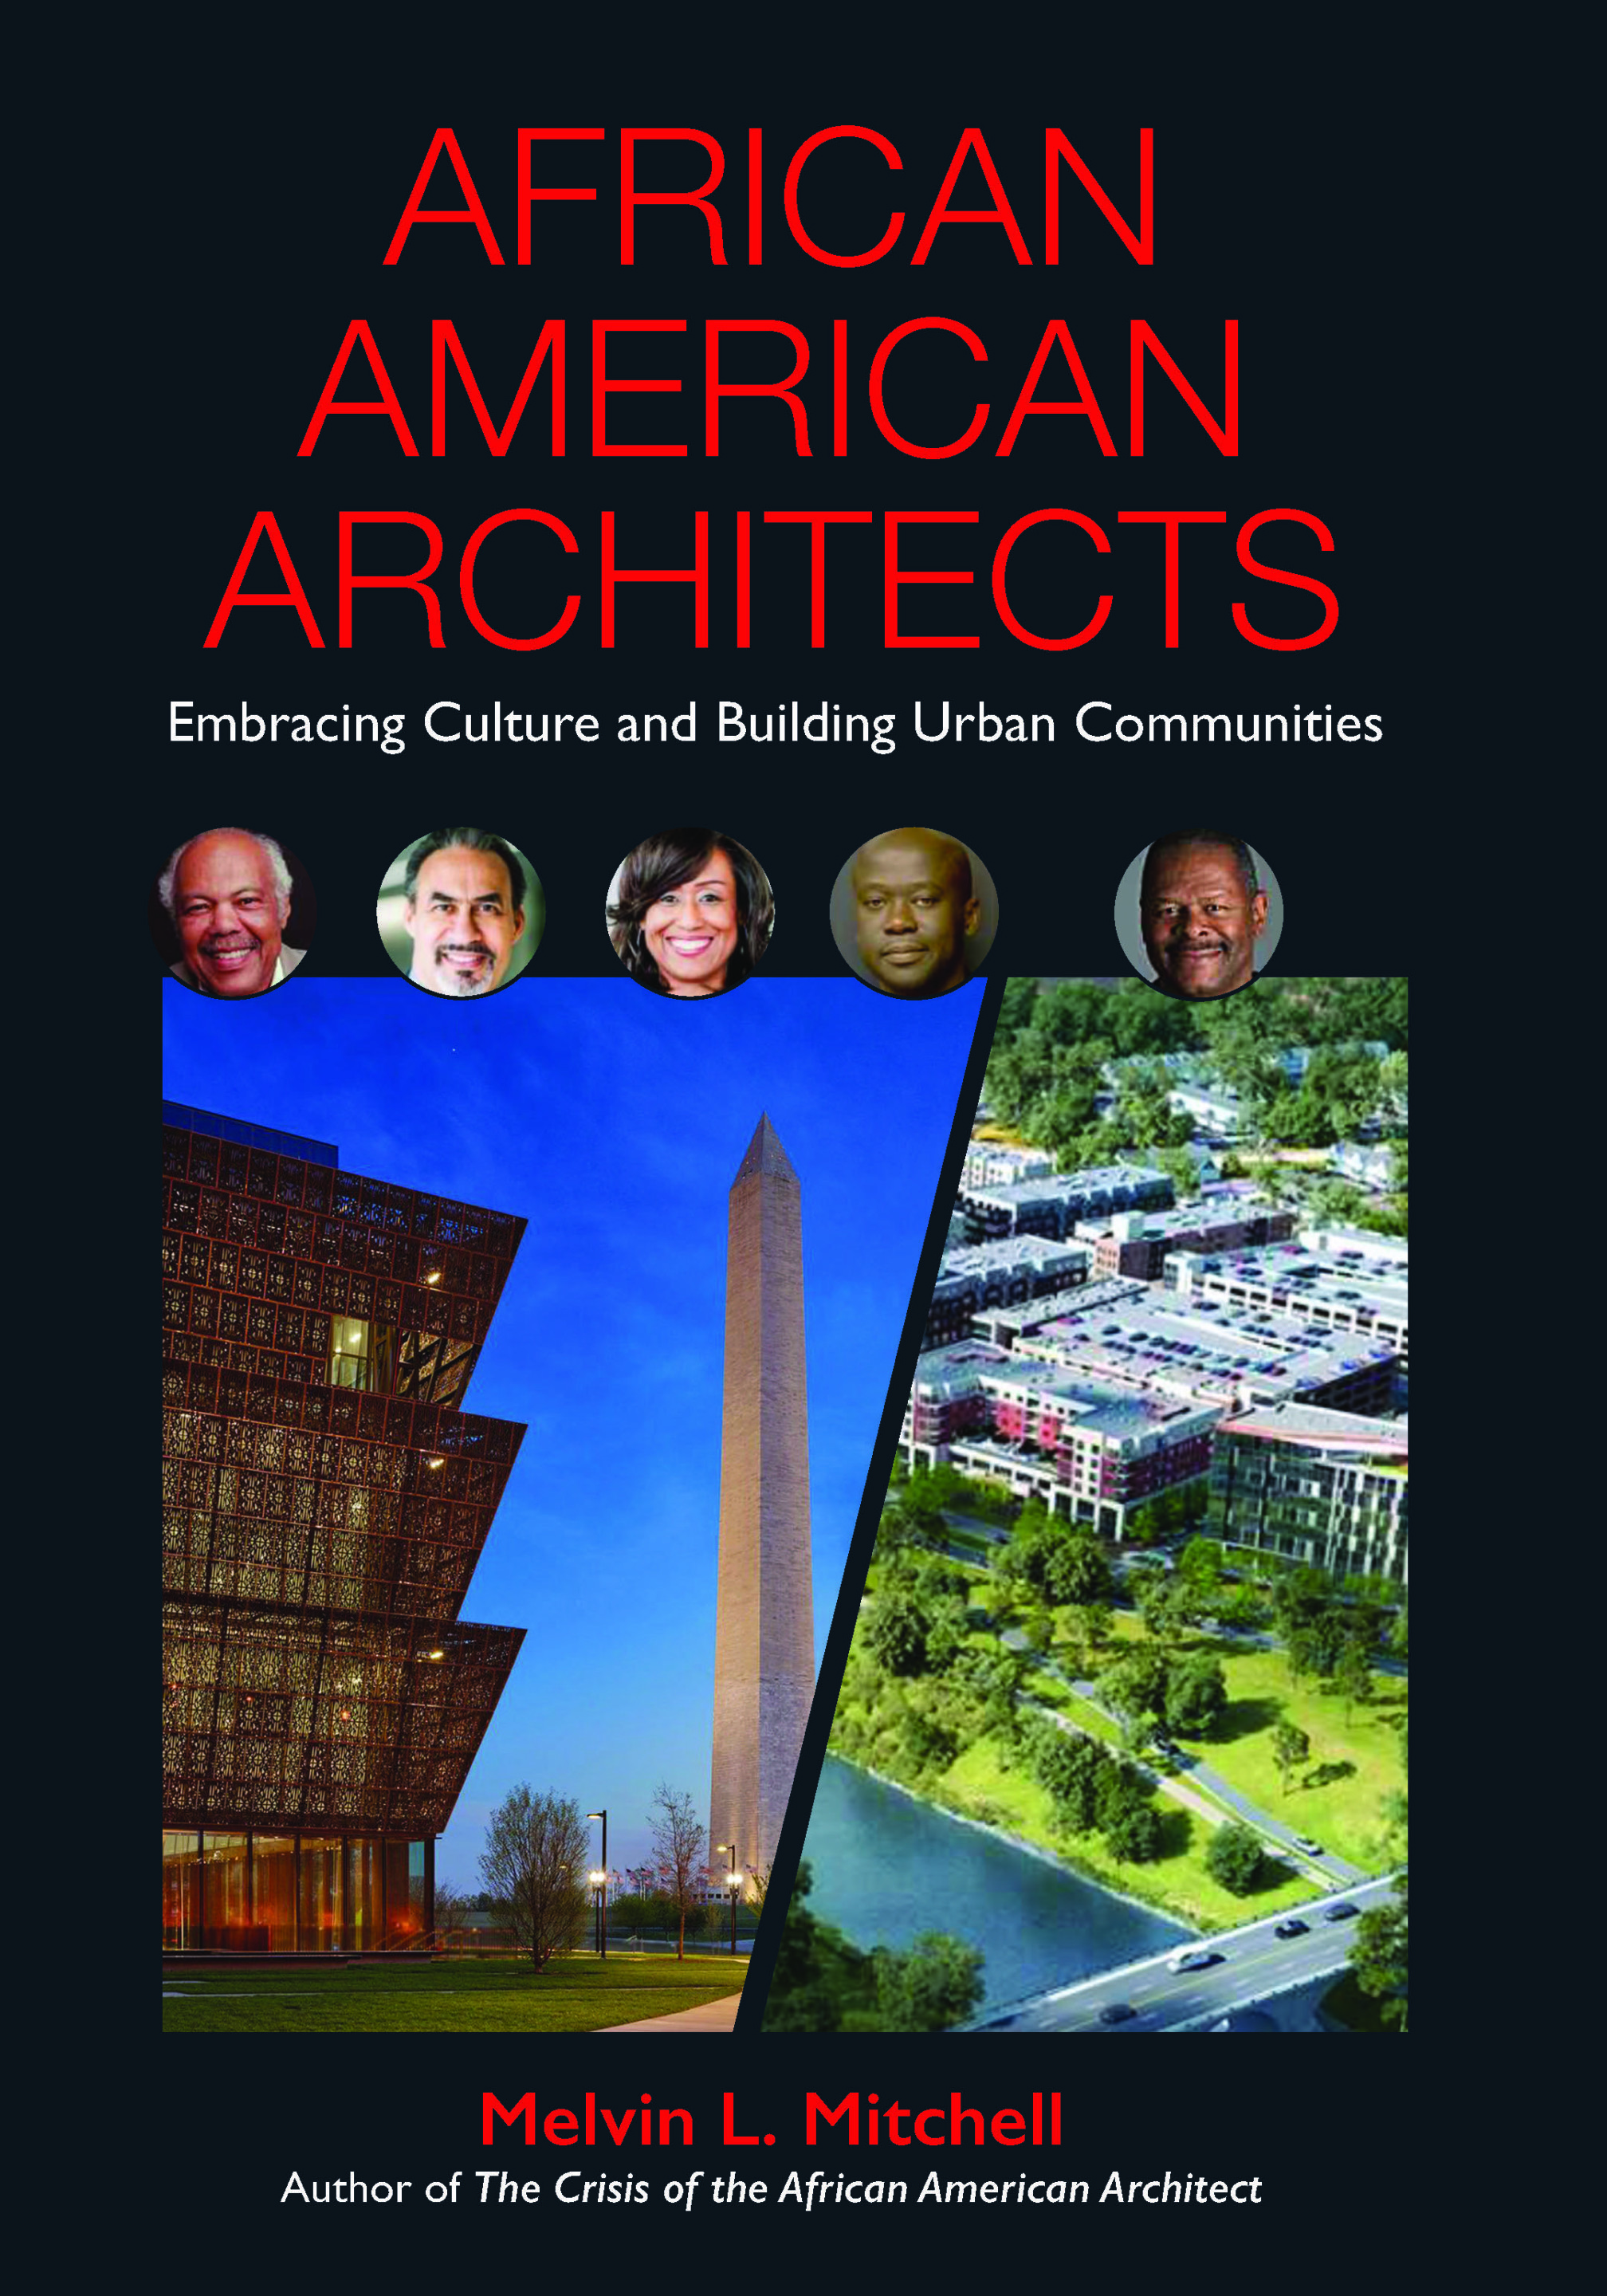 A cover of a book reading African American Architects: Embracing Culture and Building Urban Communities